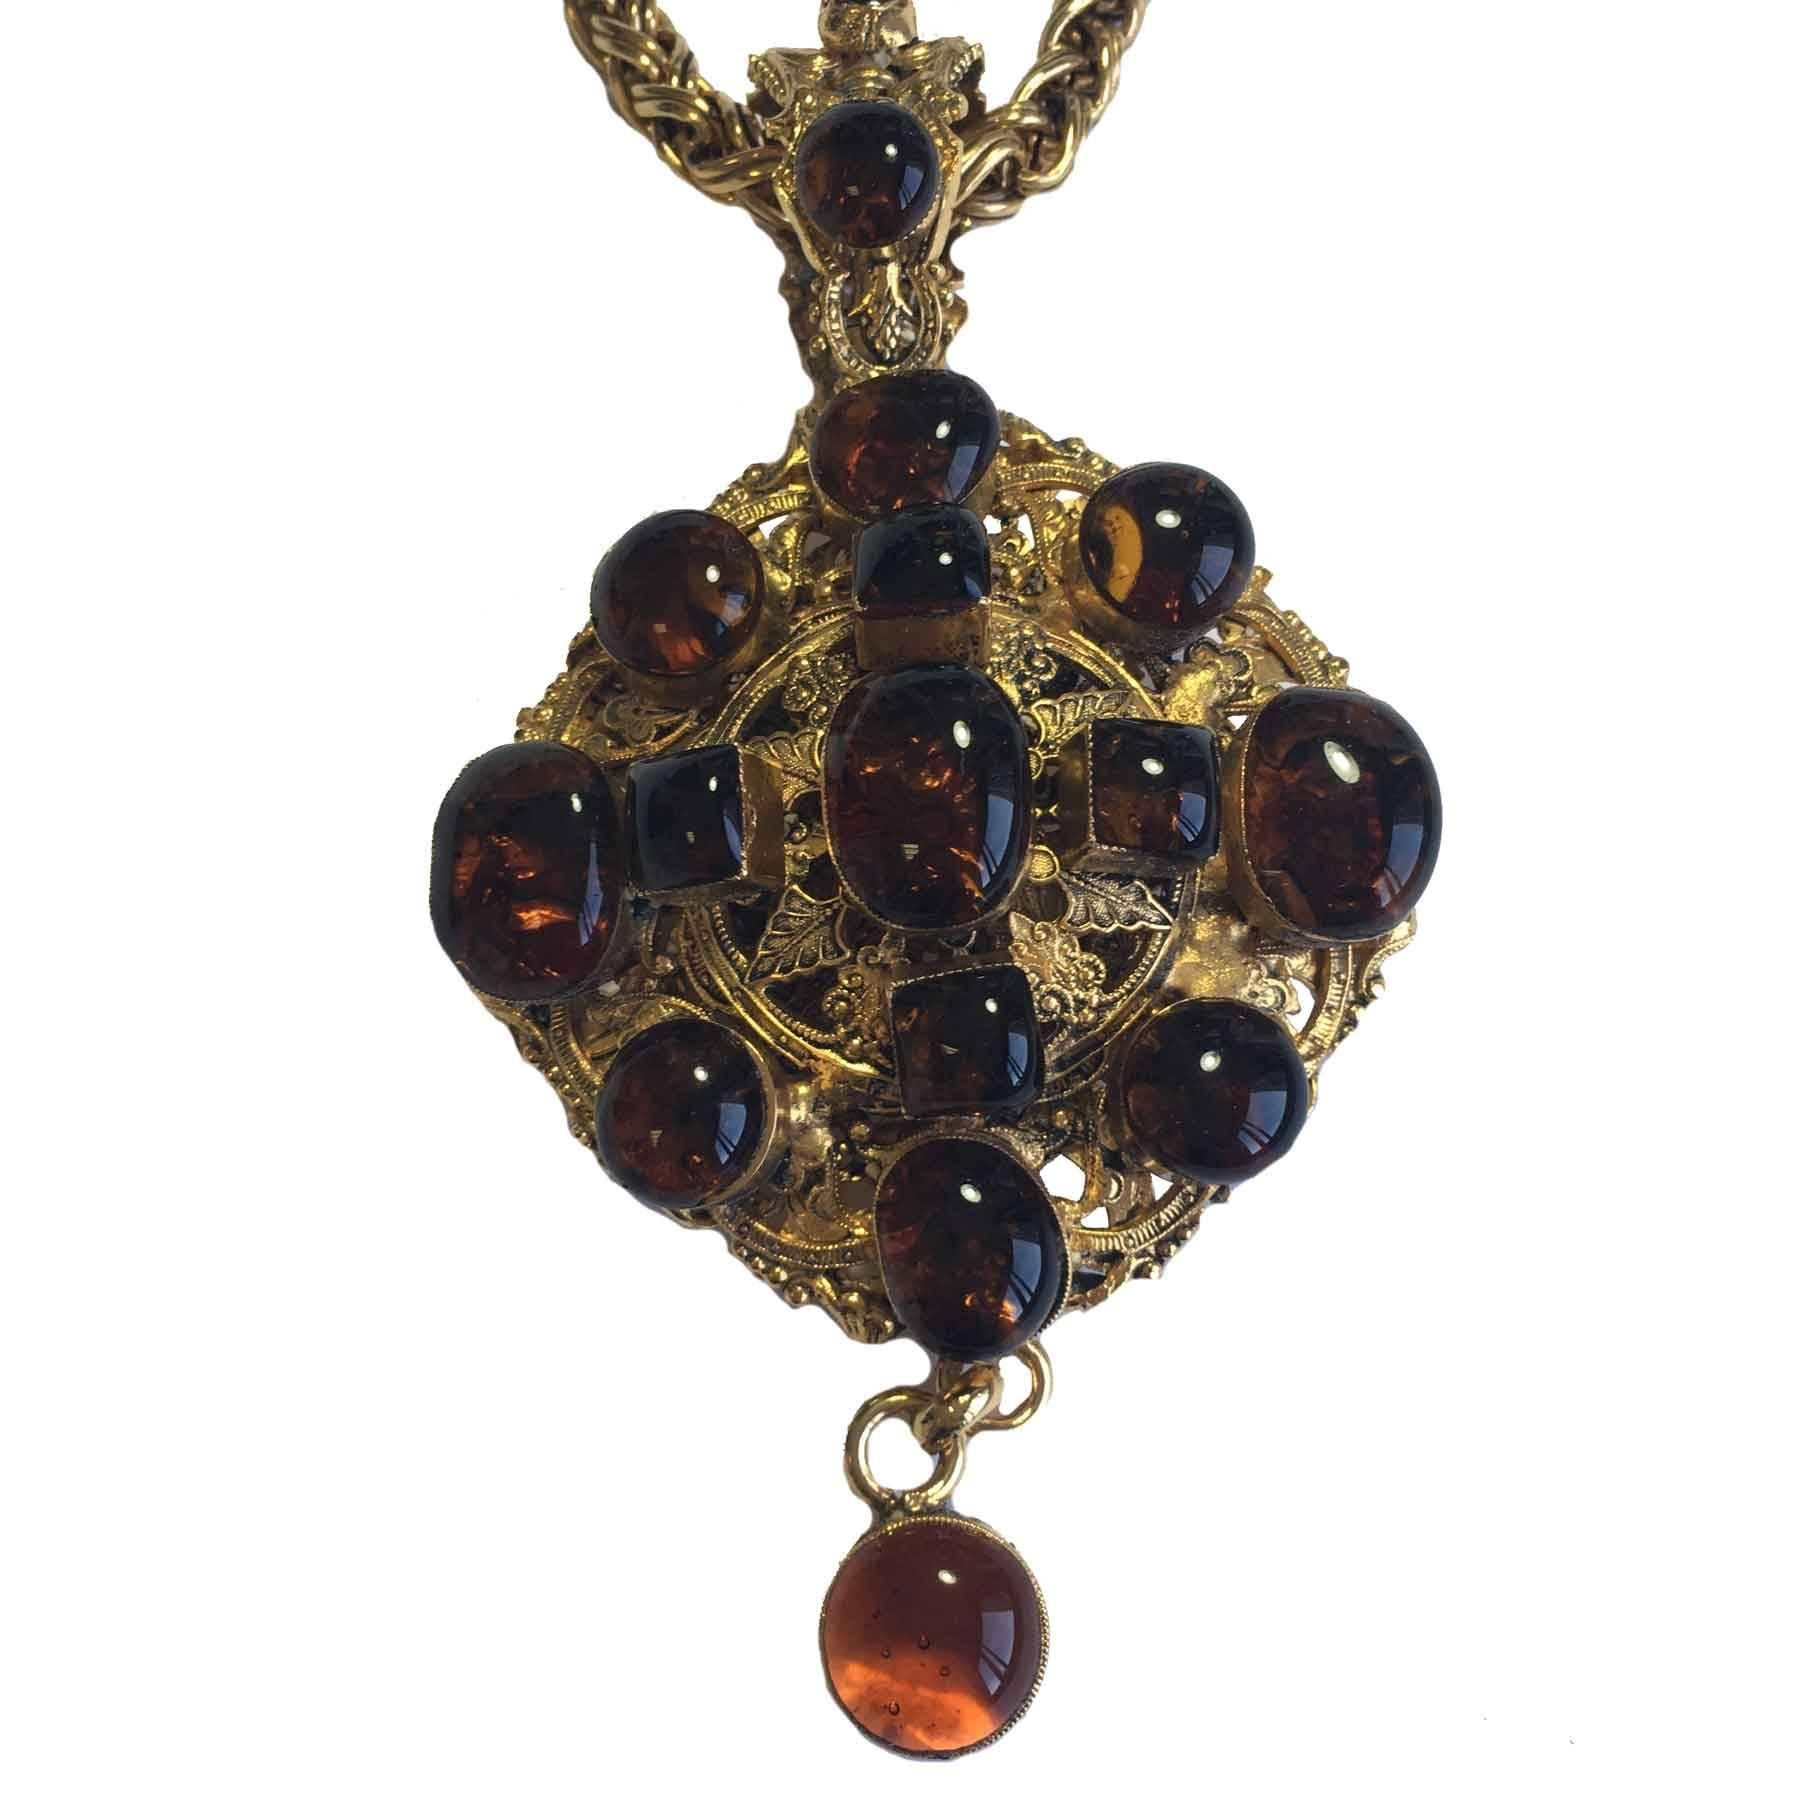 MARGUERITE DE VALOIS Necklace in Gilded Metal and Pendant in Topaze Molten Glass 2